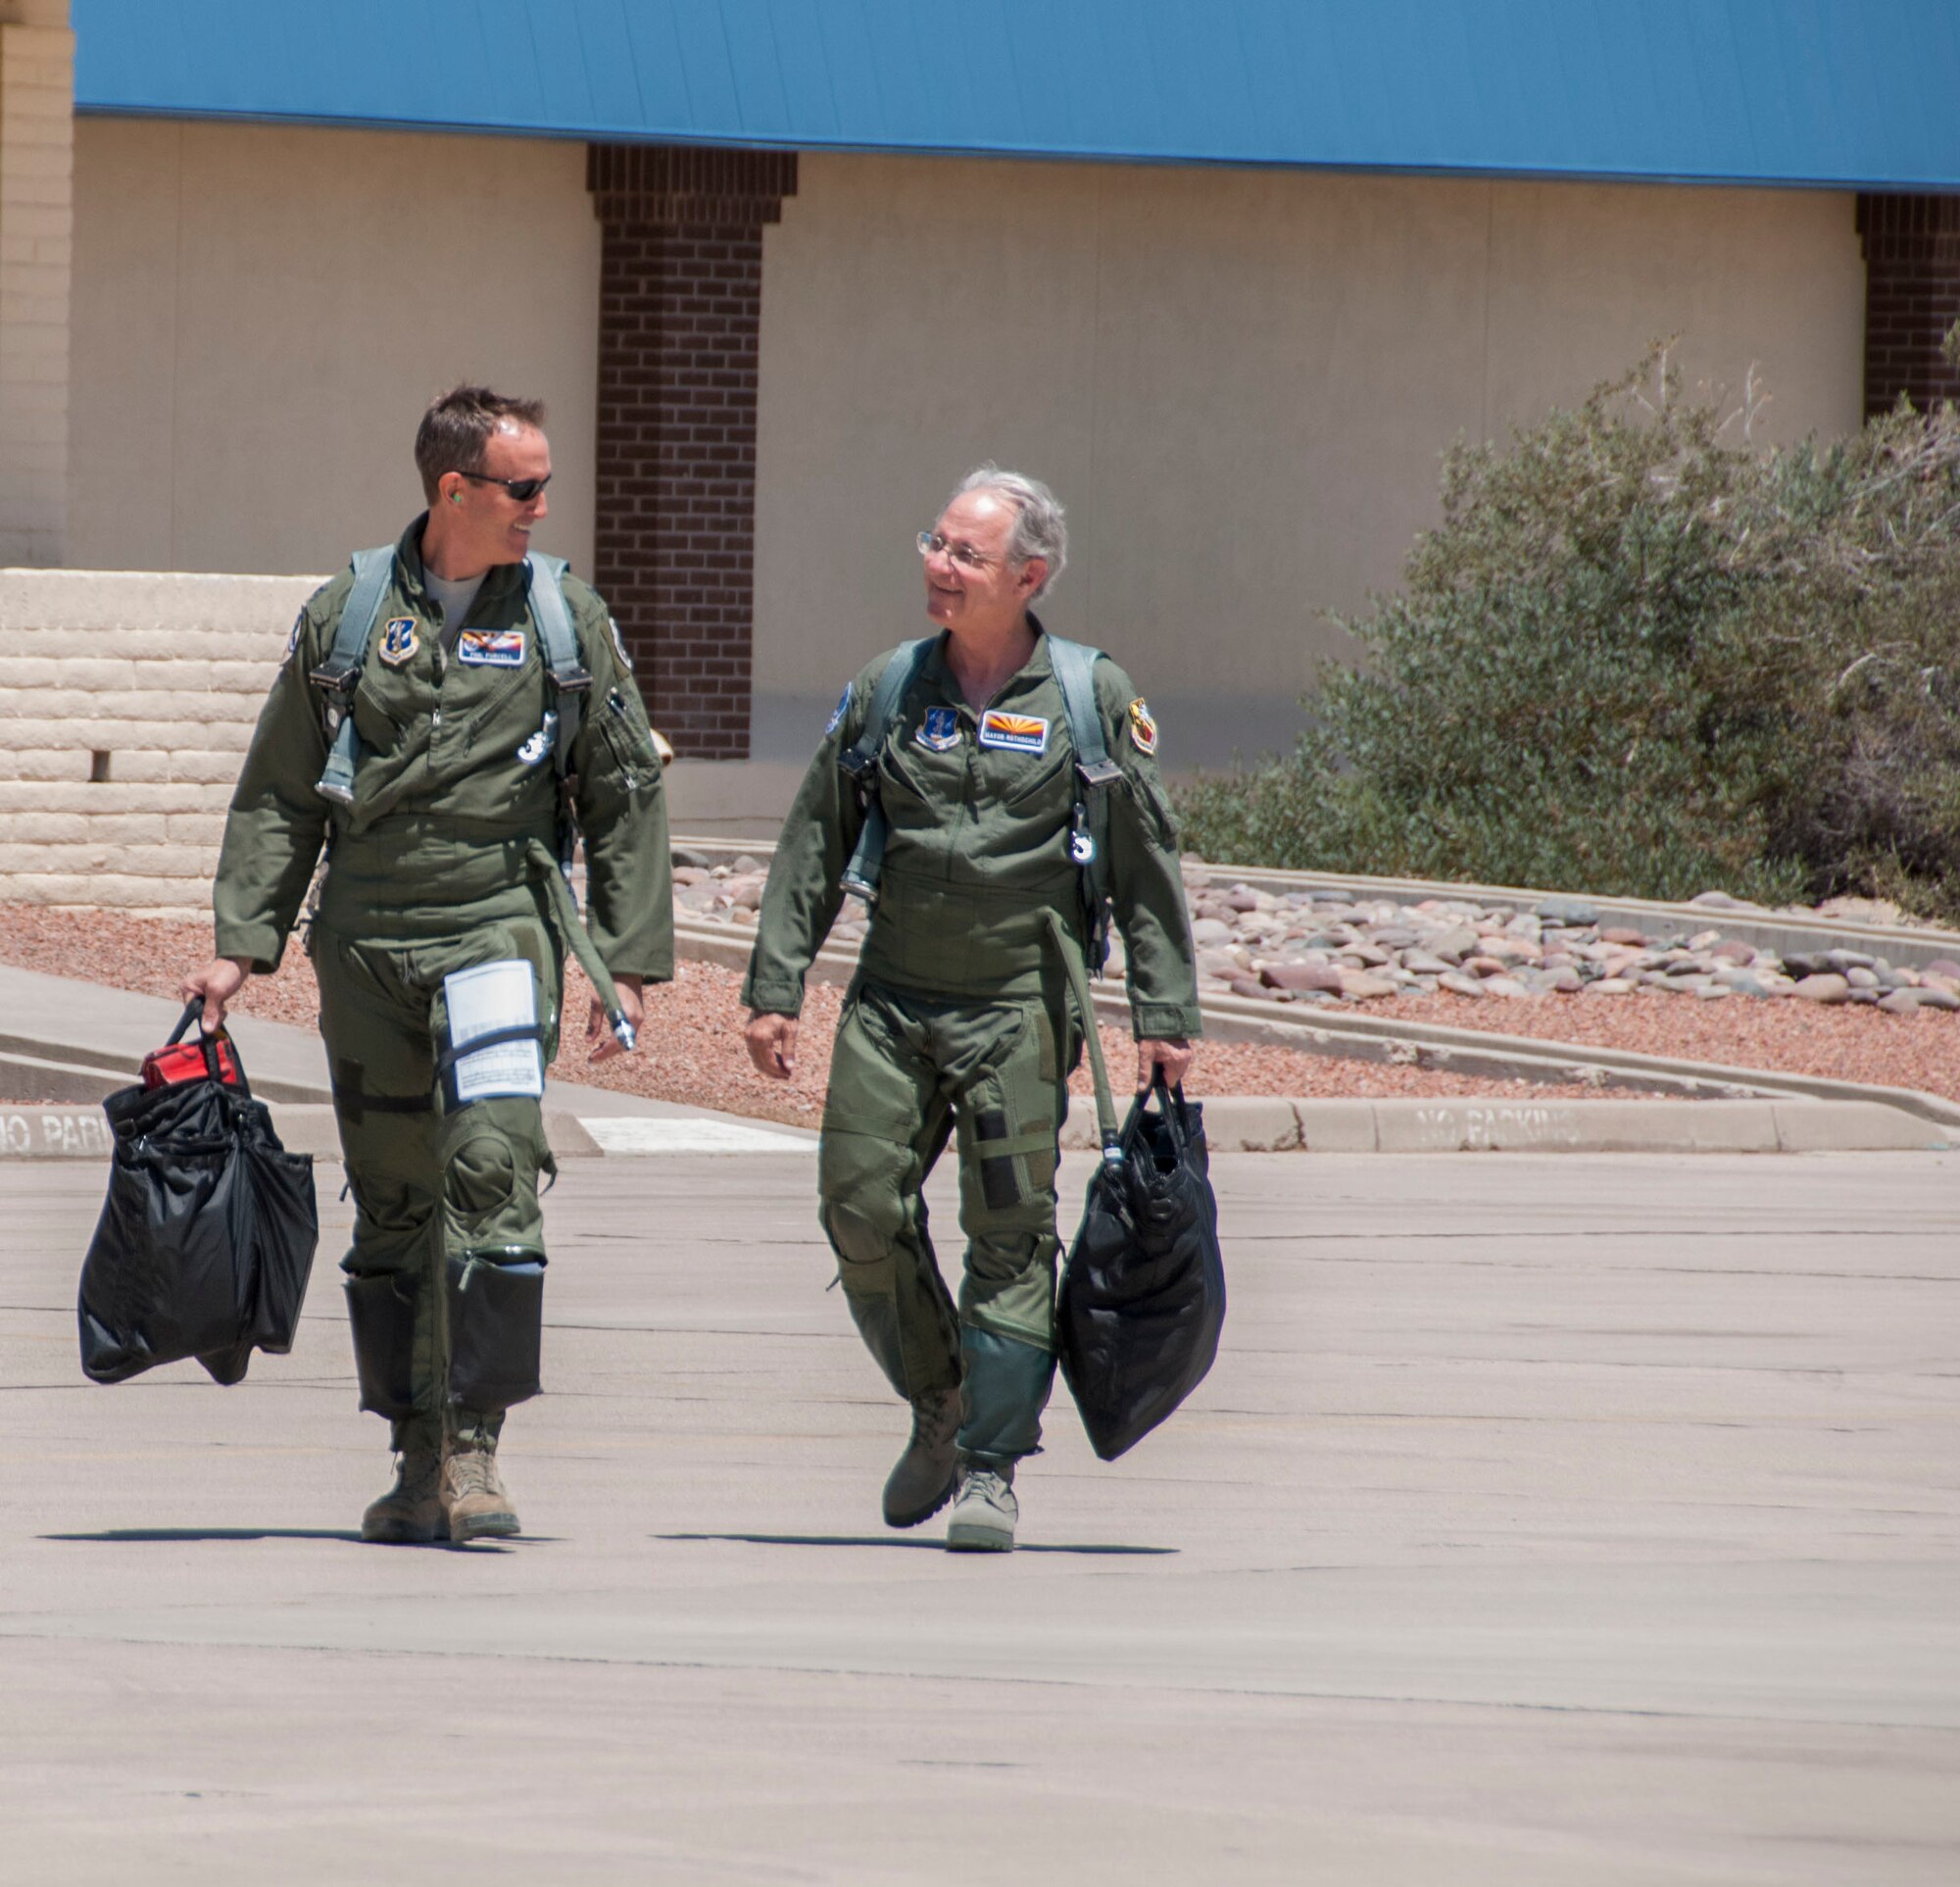 Jonathan Rothschild, Mayor of Tucson and Col. Phil Purcell, Commander of the 162nd Wing, proudly stride toward an awaiting F-16 Falcon, on May 3.  Rothschild was invited to the 162nd Wing to participate in an orientation flight, which raises awareness and understanding about the wing's mission. (U.S. Air National Guard photo by Staff Sgt. Dina Farmer/Released)